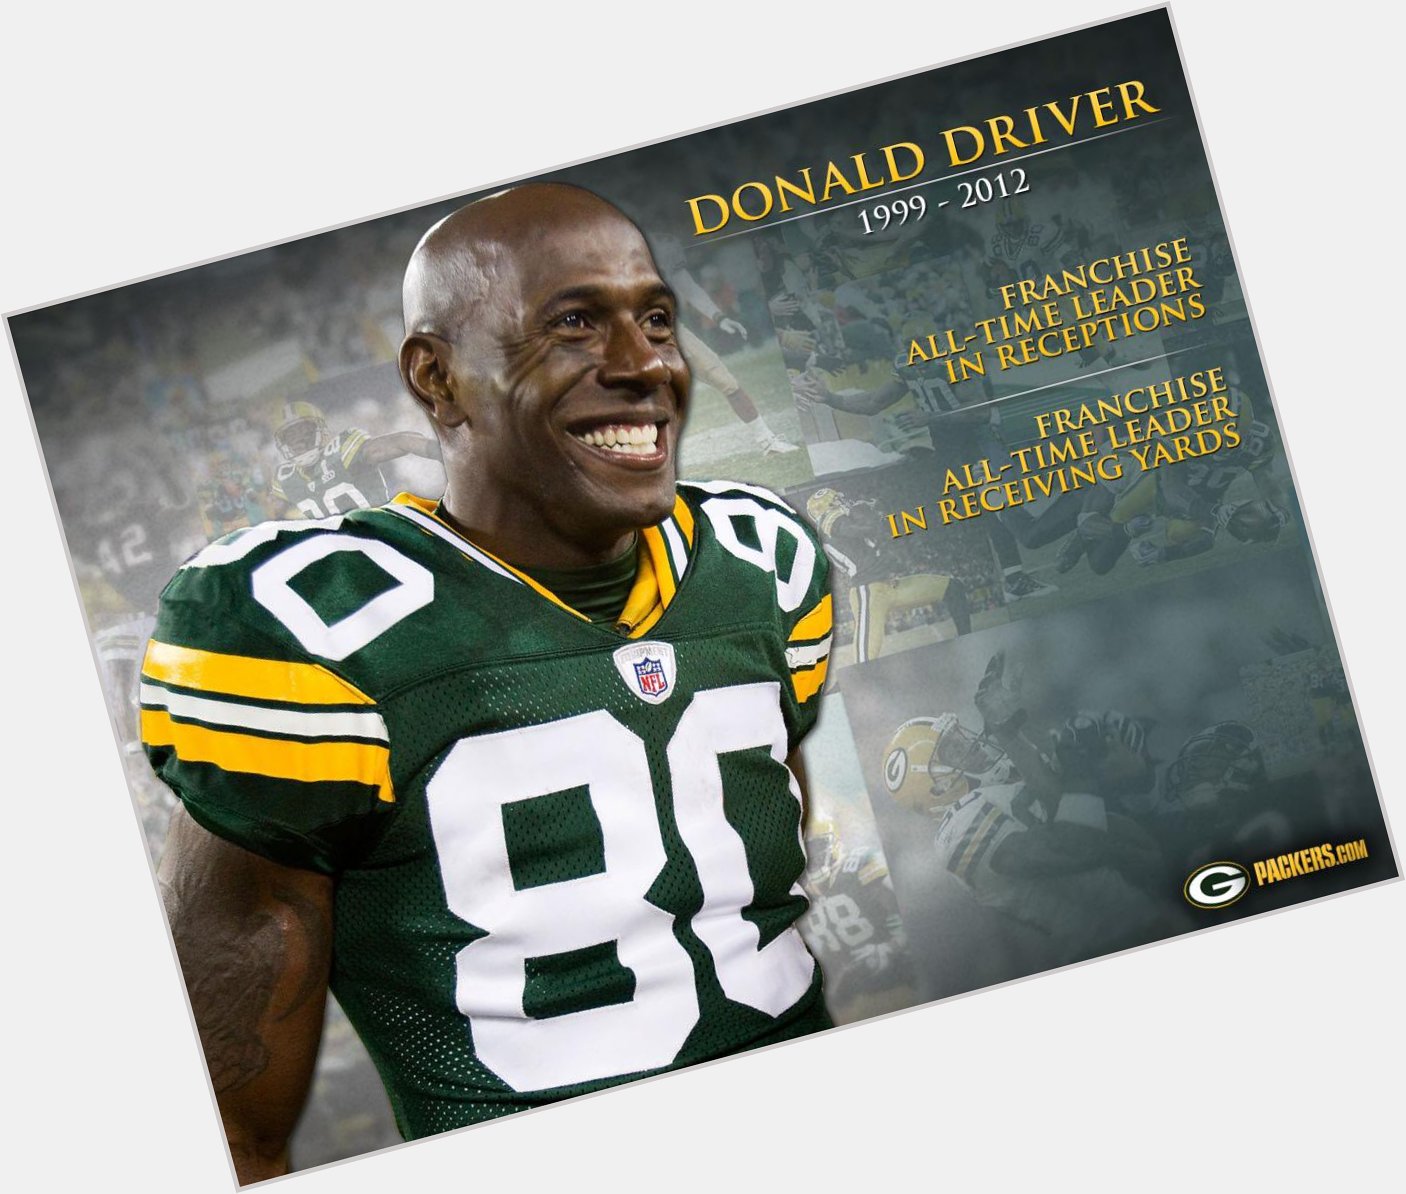 Happy birthday Donald driver your success has driven us all. 